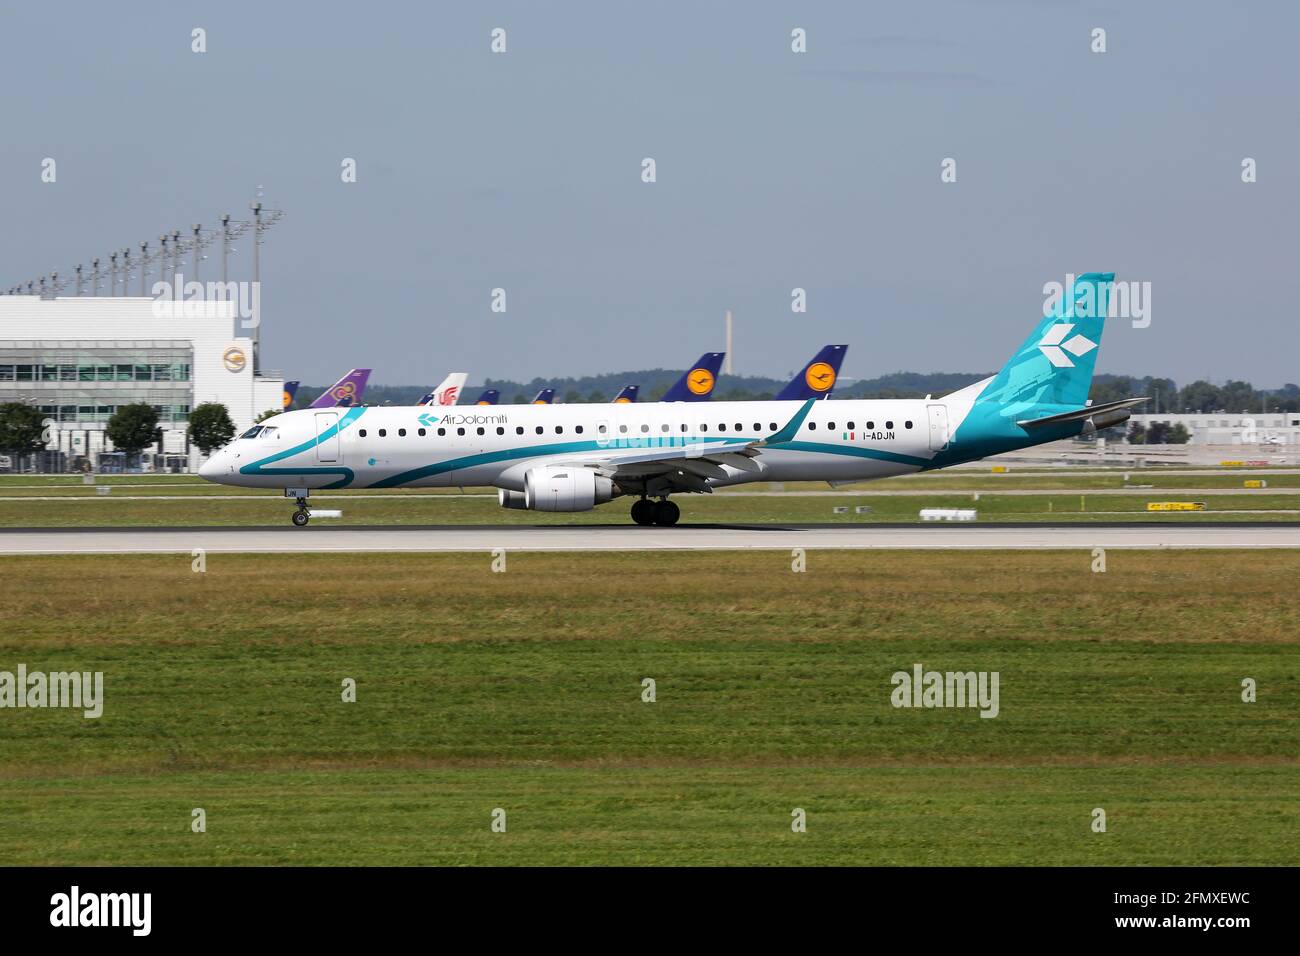 Munich, Germany – 8. August 2016: Air Dolomiti Embraer 195 at Munich airport (MUC) in Germany. Embraer is an aircraft manufacturer based in Brazil. Stock Photo